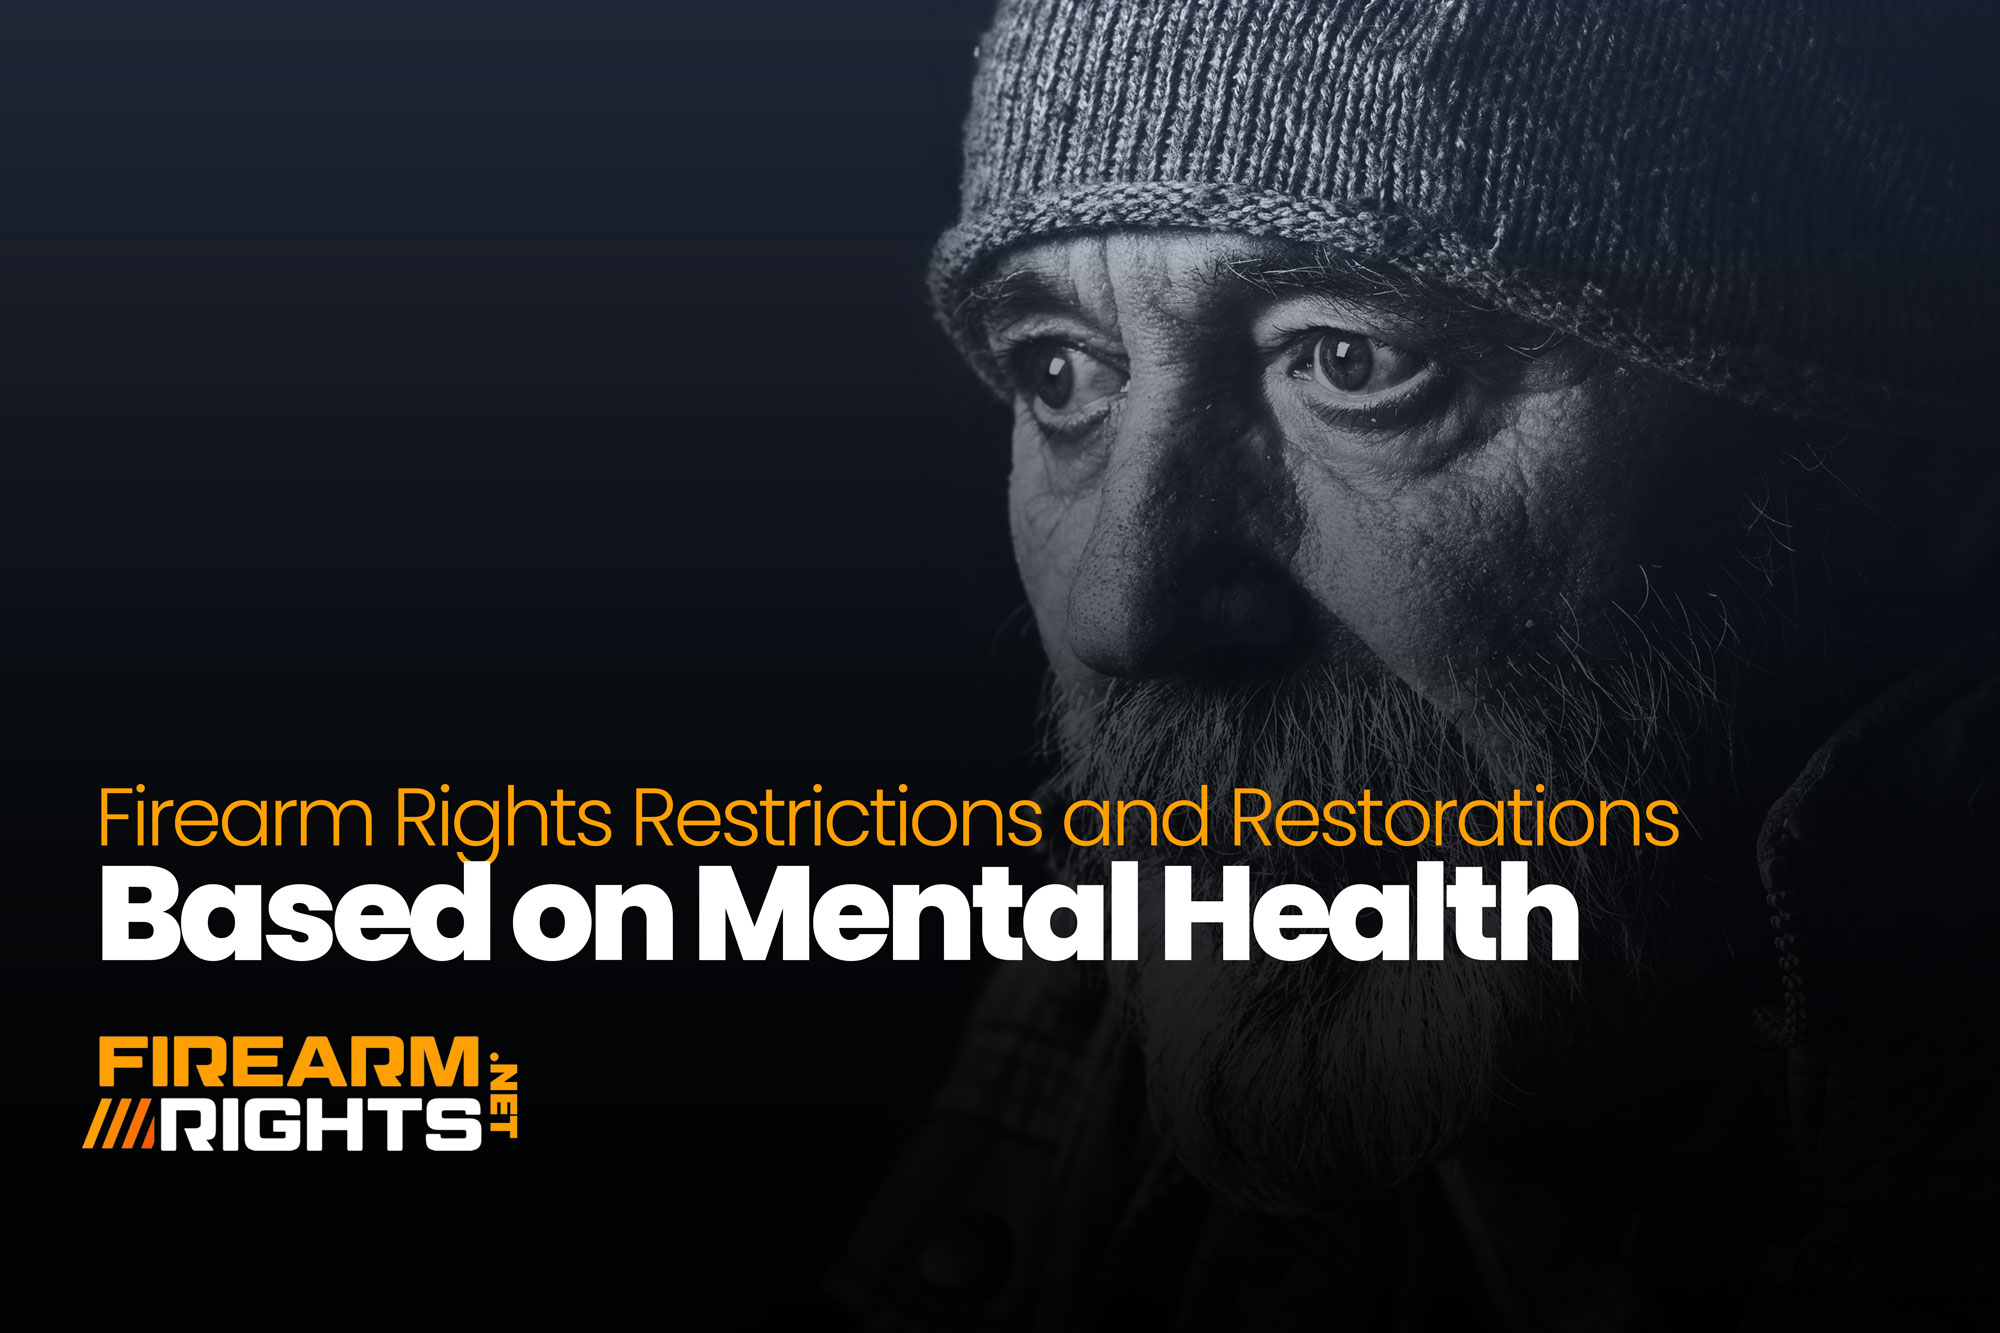 Firearm-Rights-Restrictions-based-on-Mental-Health-Conditions